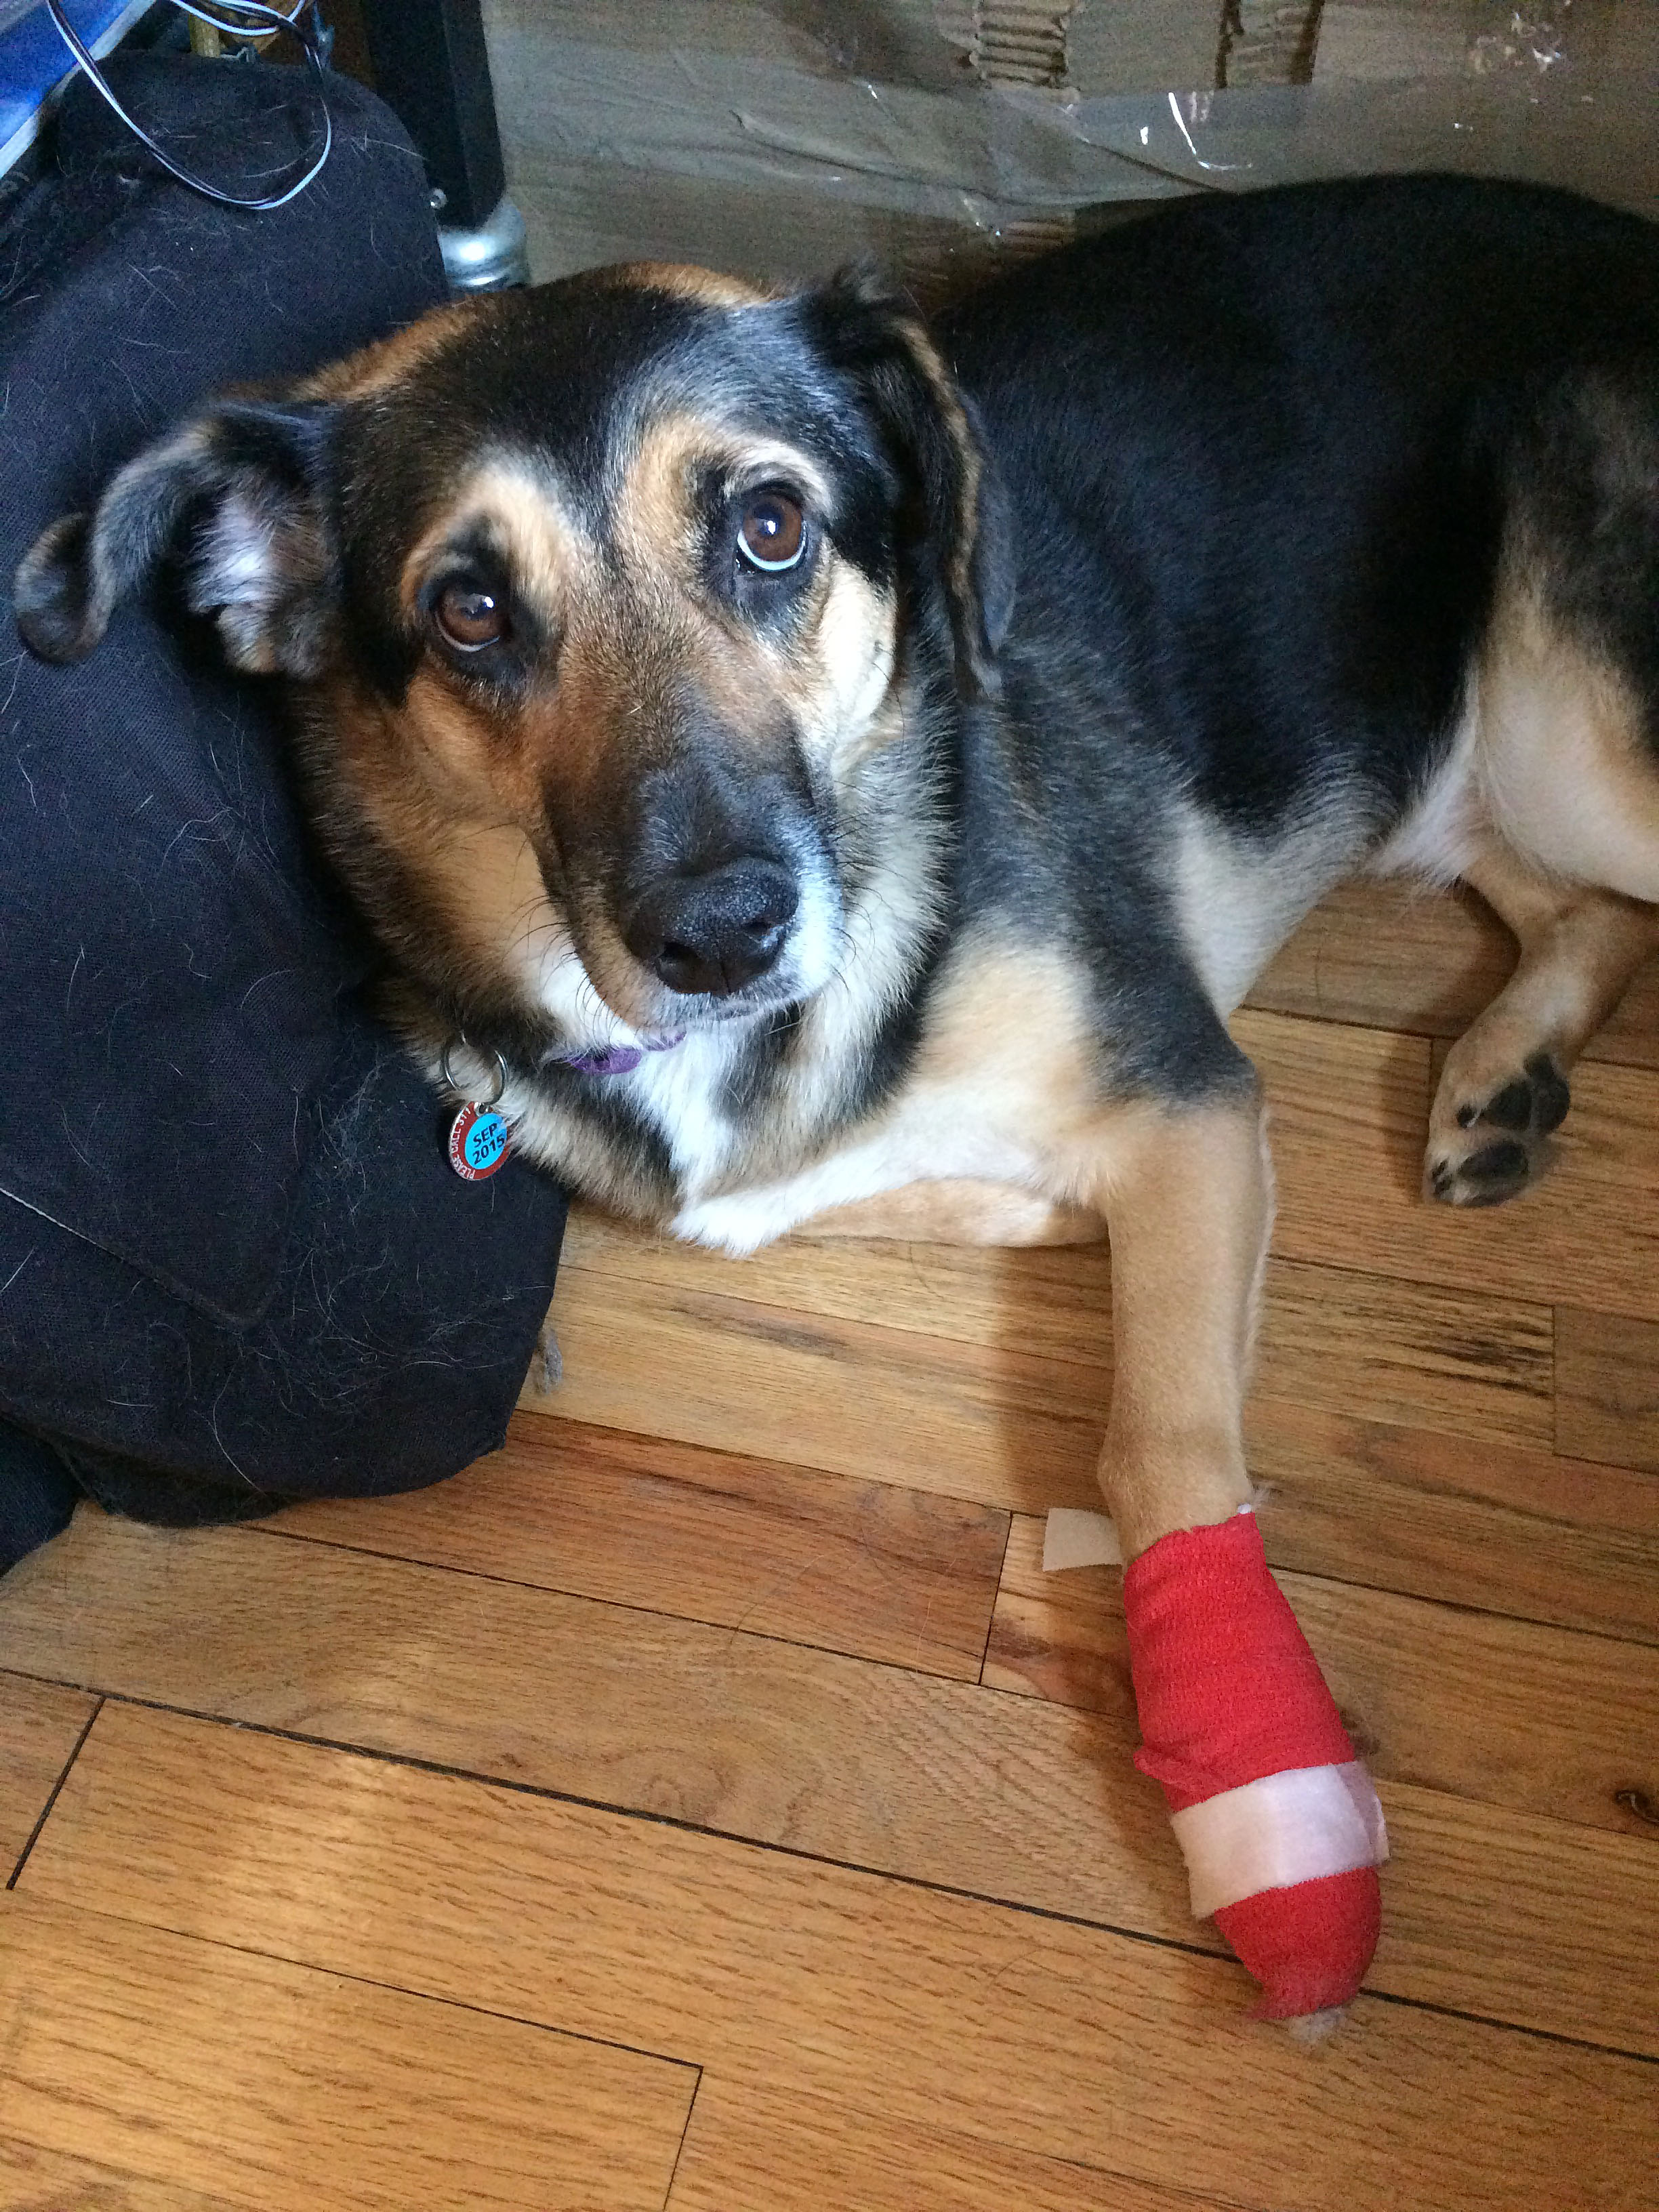 Leila with her injured paw.